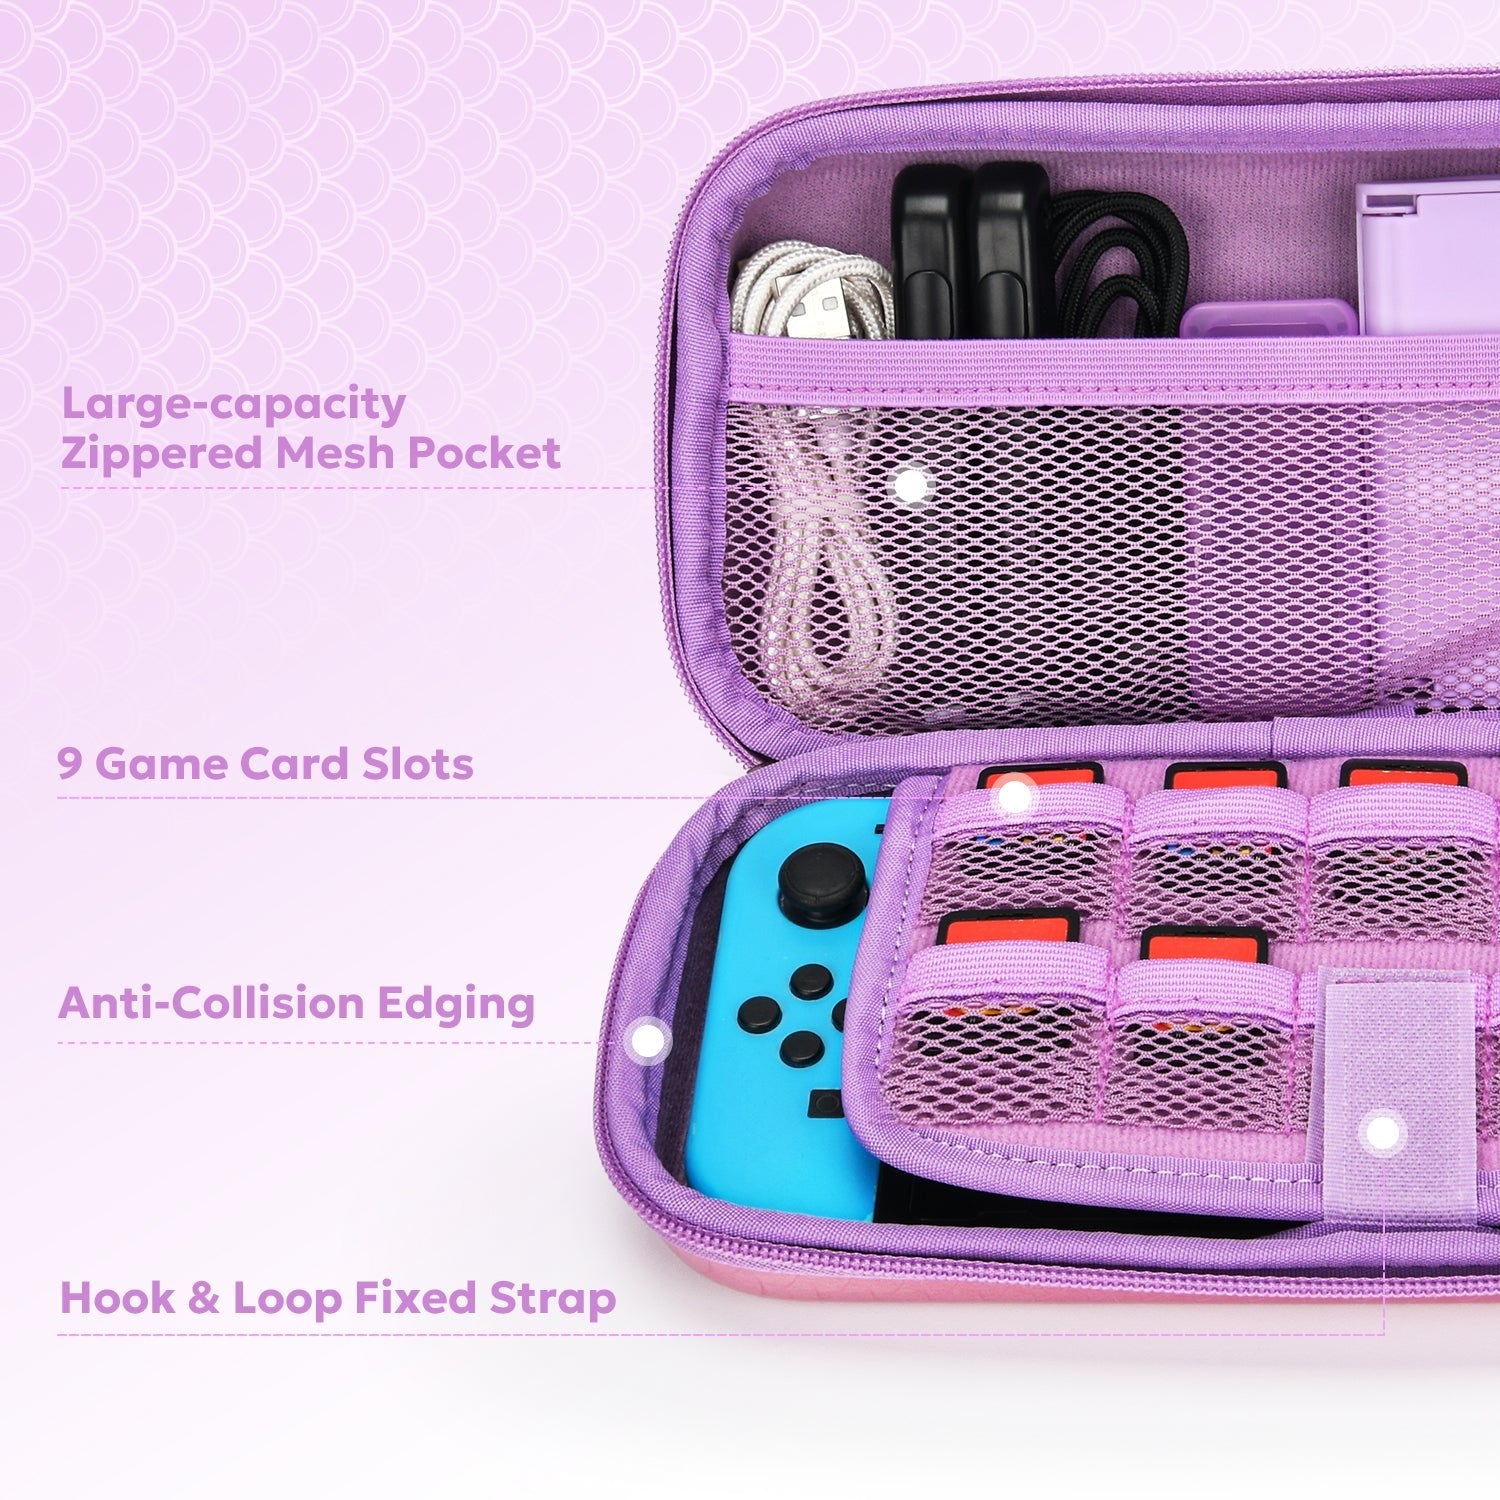 innoAura Nintendo Switch Carrying Case, Mermaid Laser Switch Cover Case